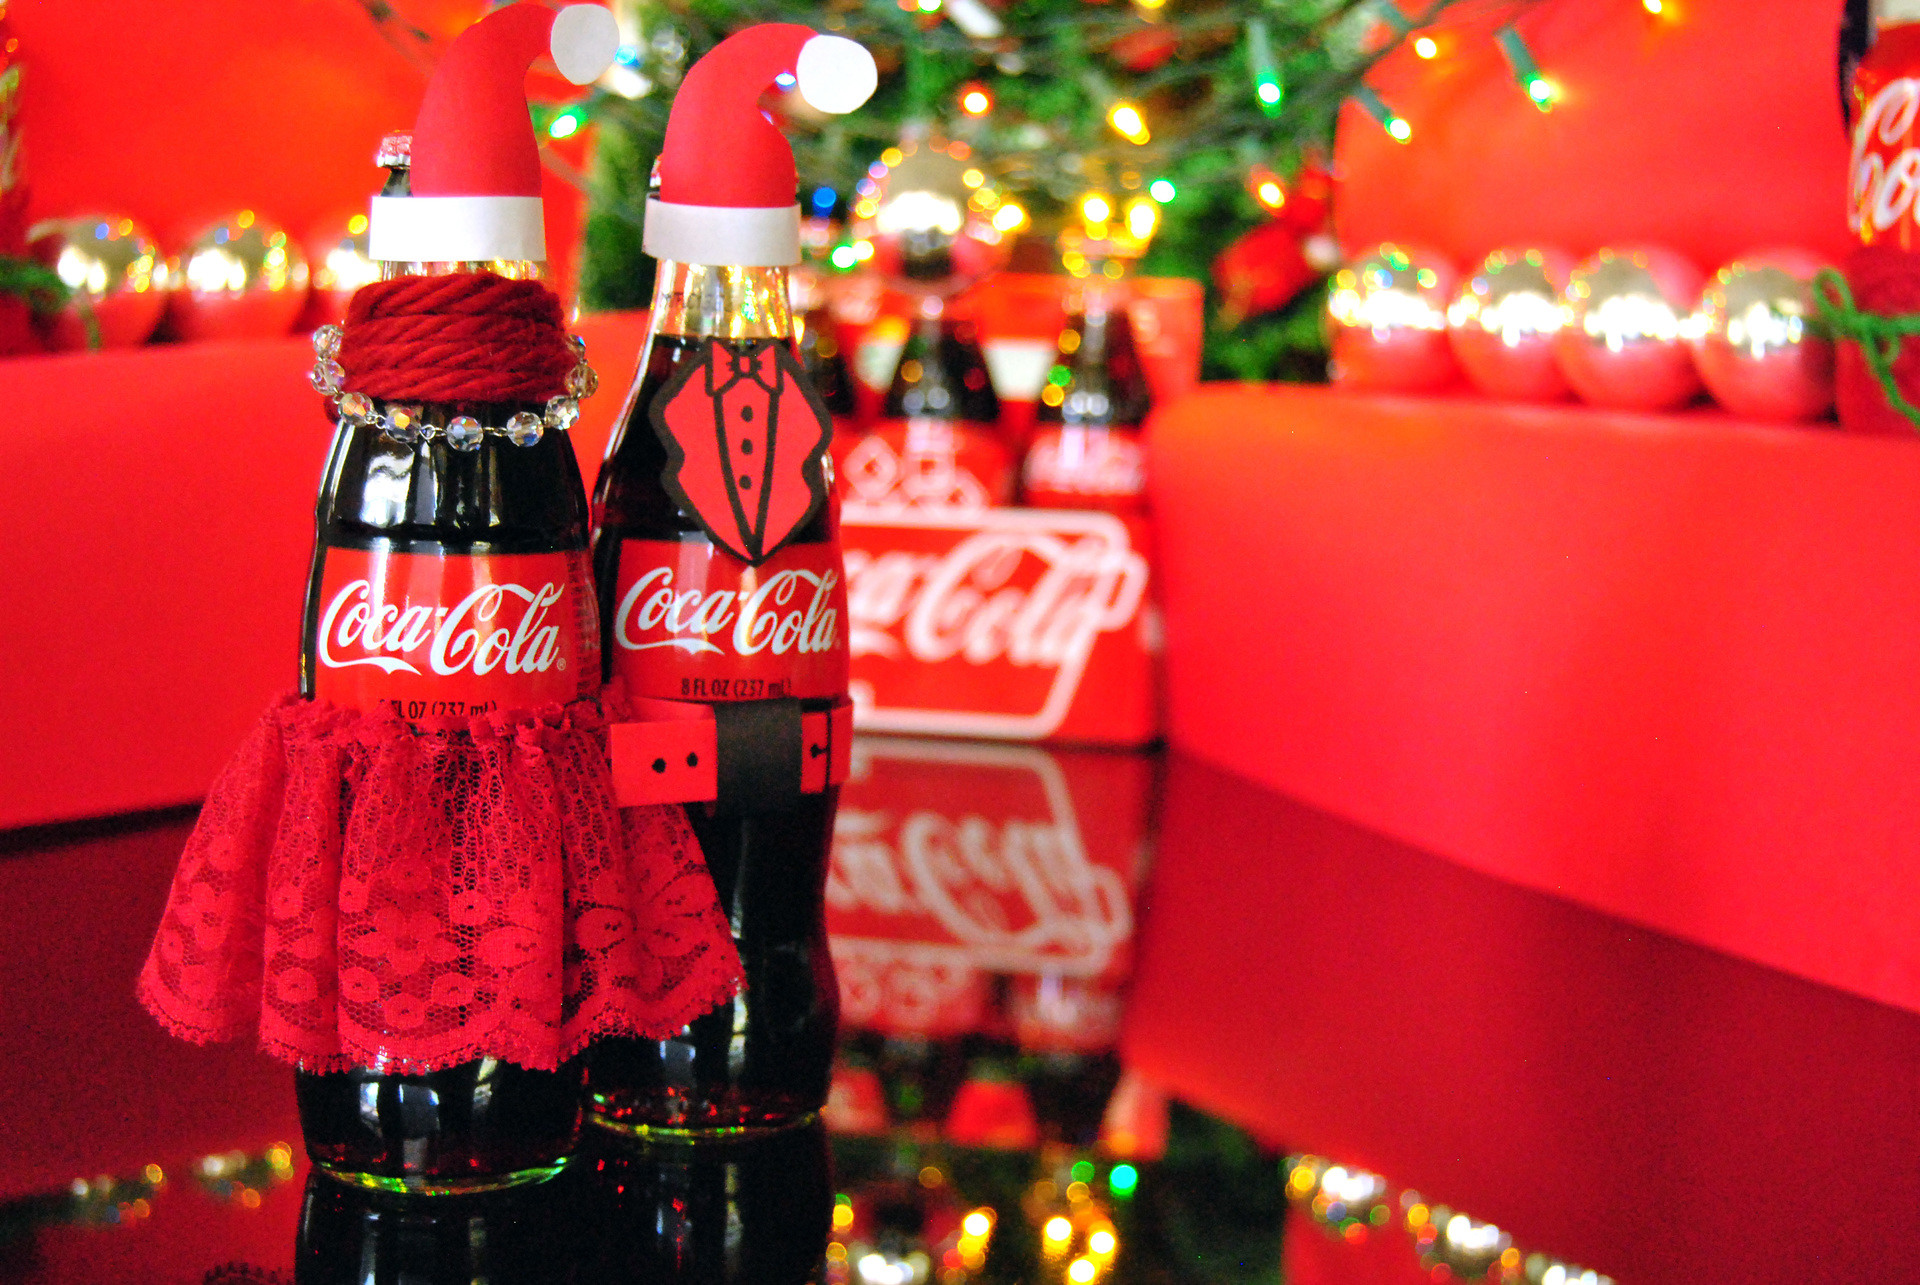 1920x1285 coca cola christmas dress up with bottles of coke and lights in the  background